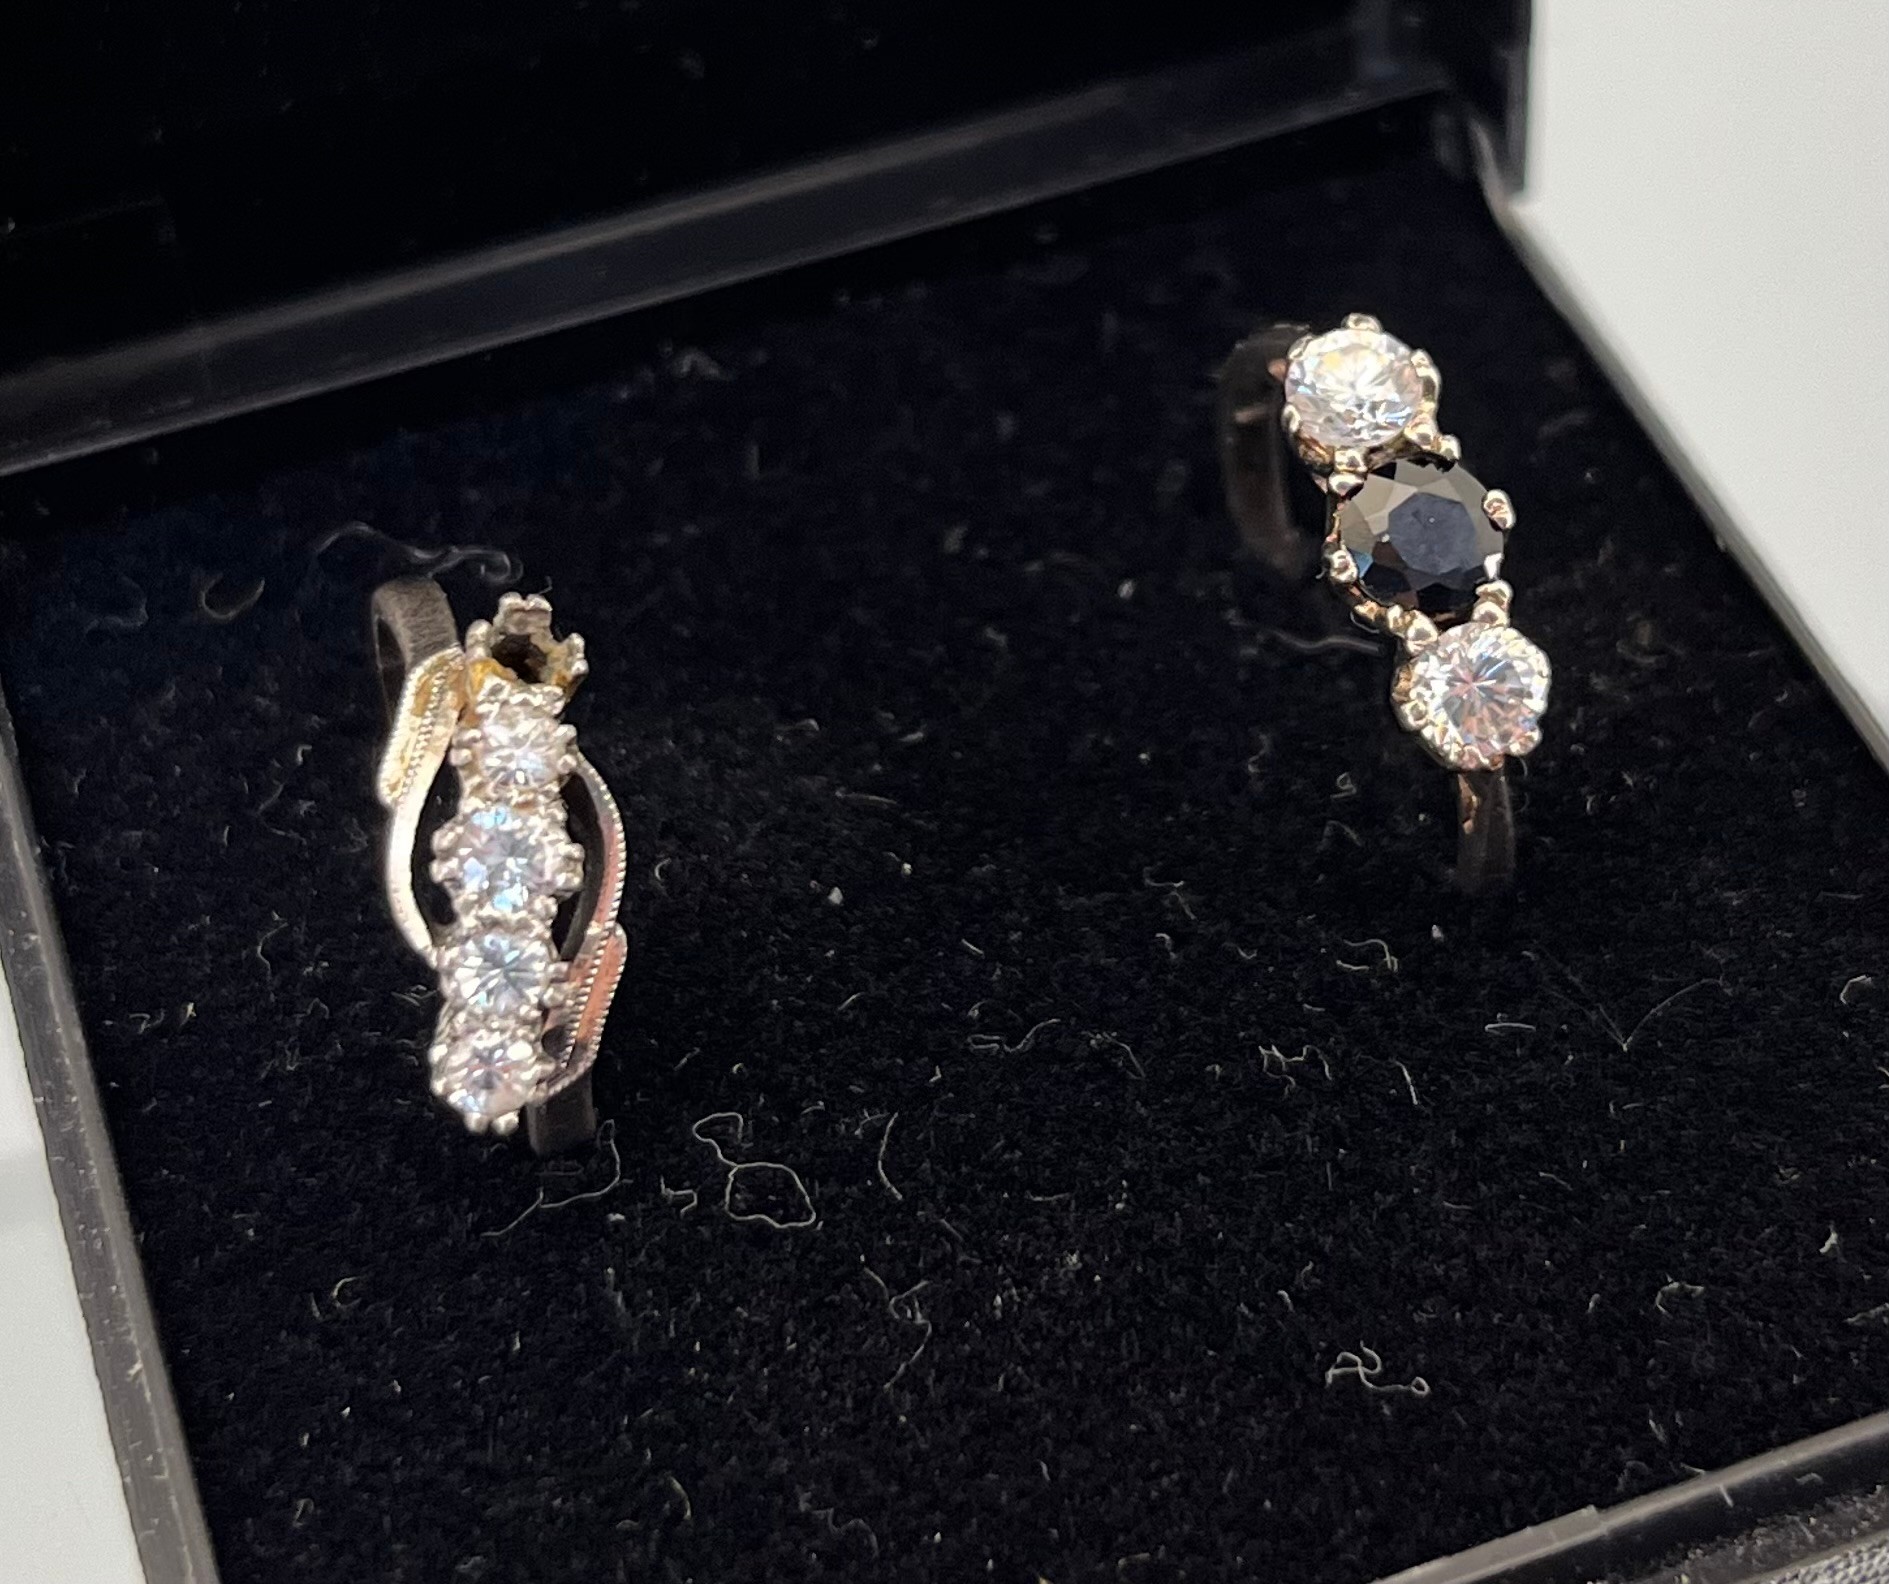 Silver ladies ring set with a Sapphire and CZ Stones. Together with 9ct & Silver ring set with clear